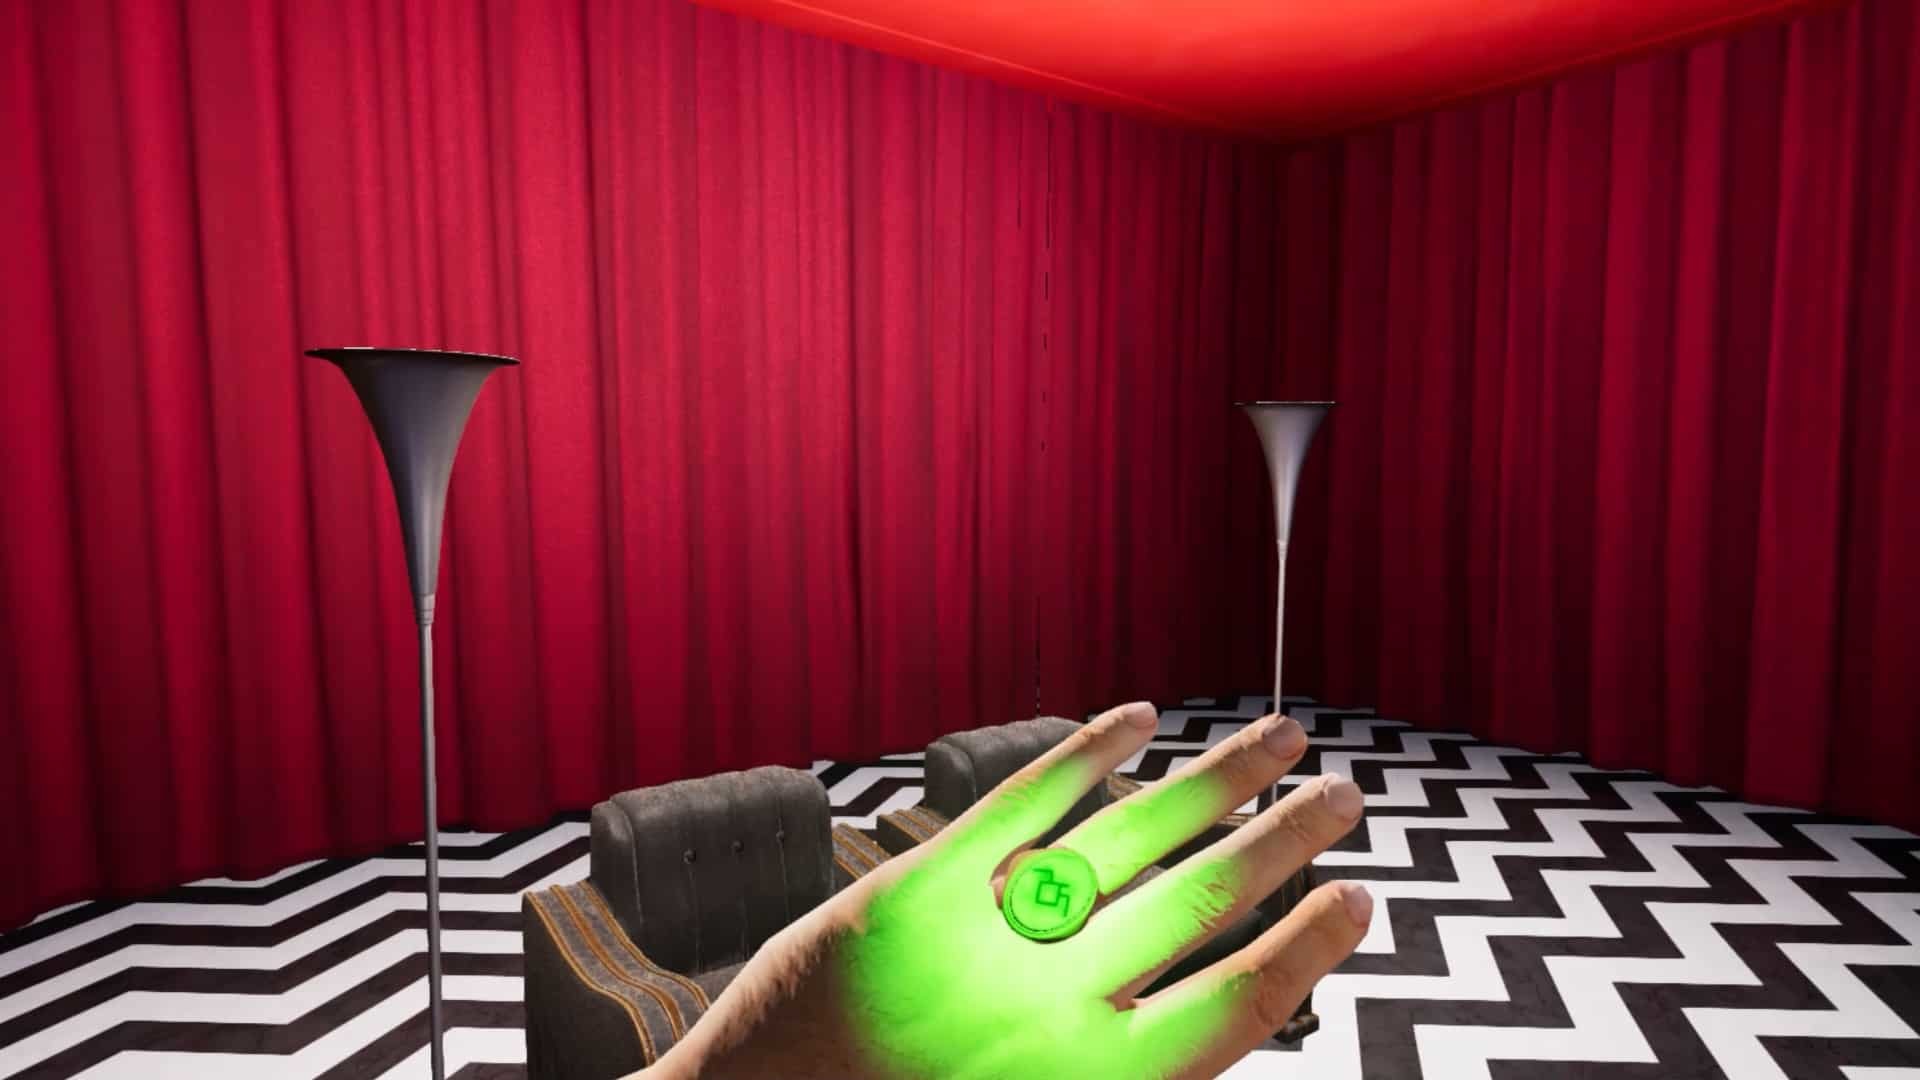 First trailer out for Twin Peaks VR, based on the TV show's setting. Image via Gamespot.